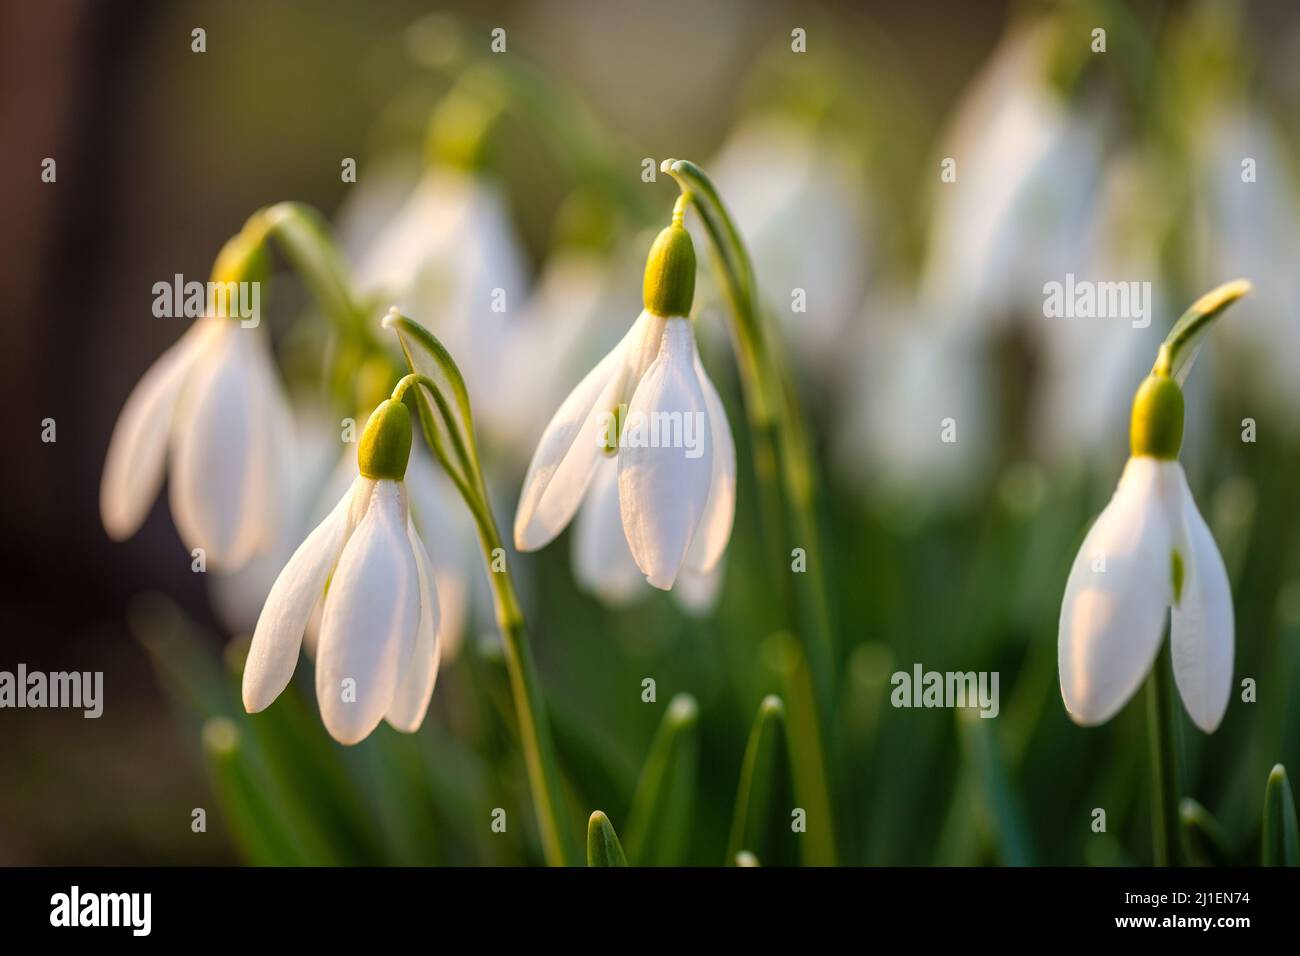 The snowdrop, latin name Galanthus nivalis, white flowers blooming in spring. Stock Photo